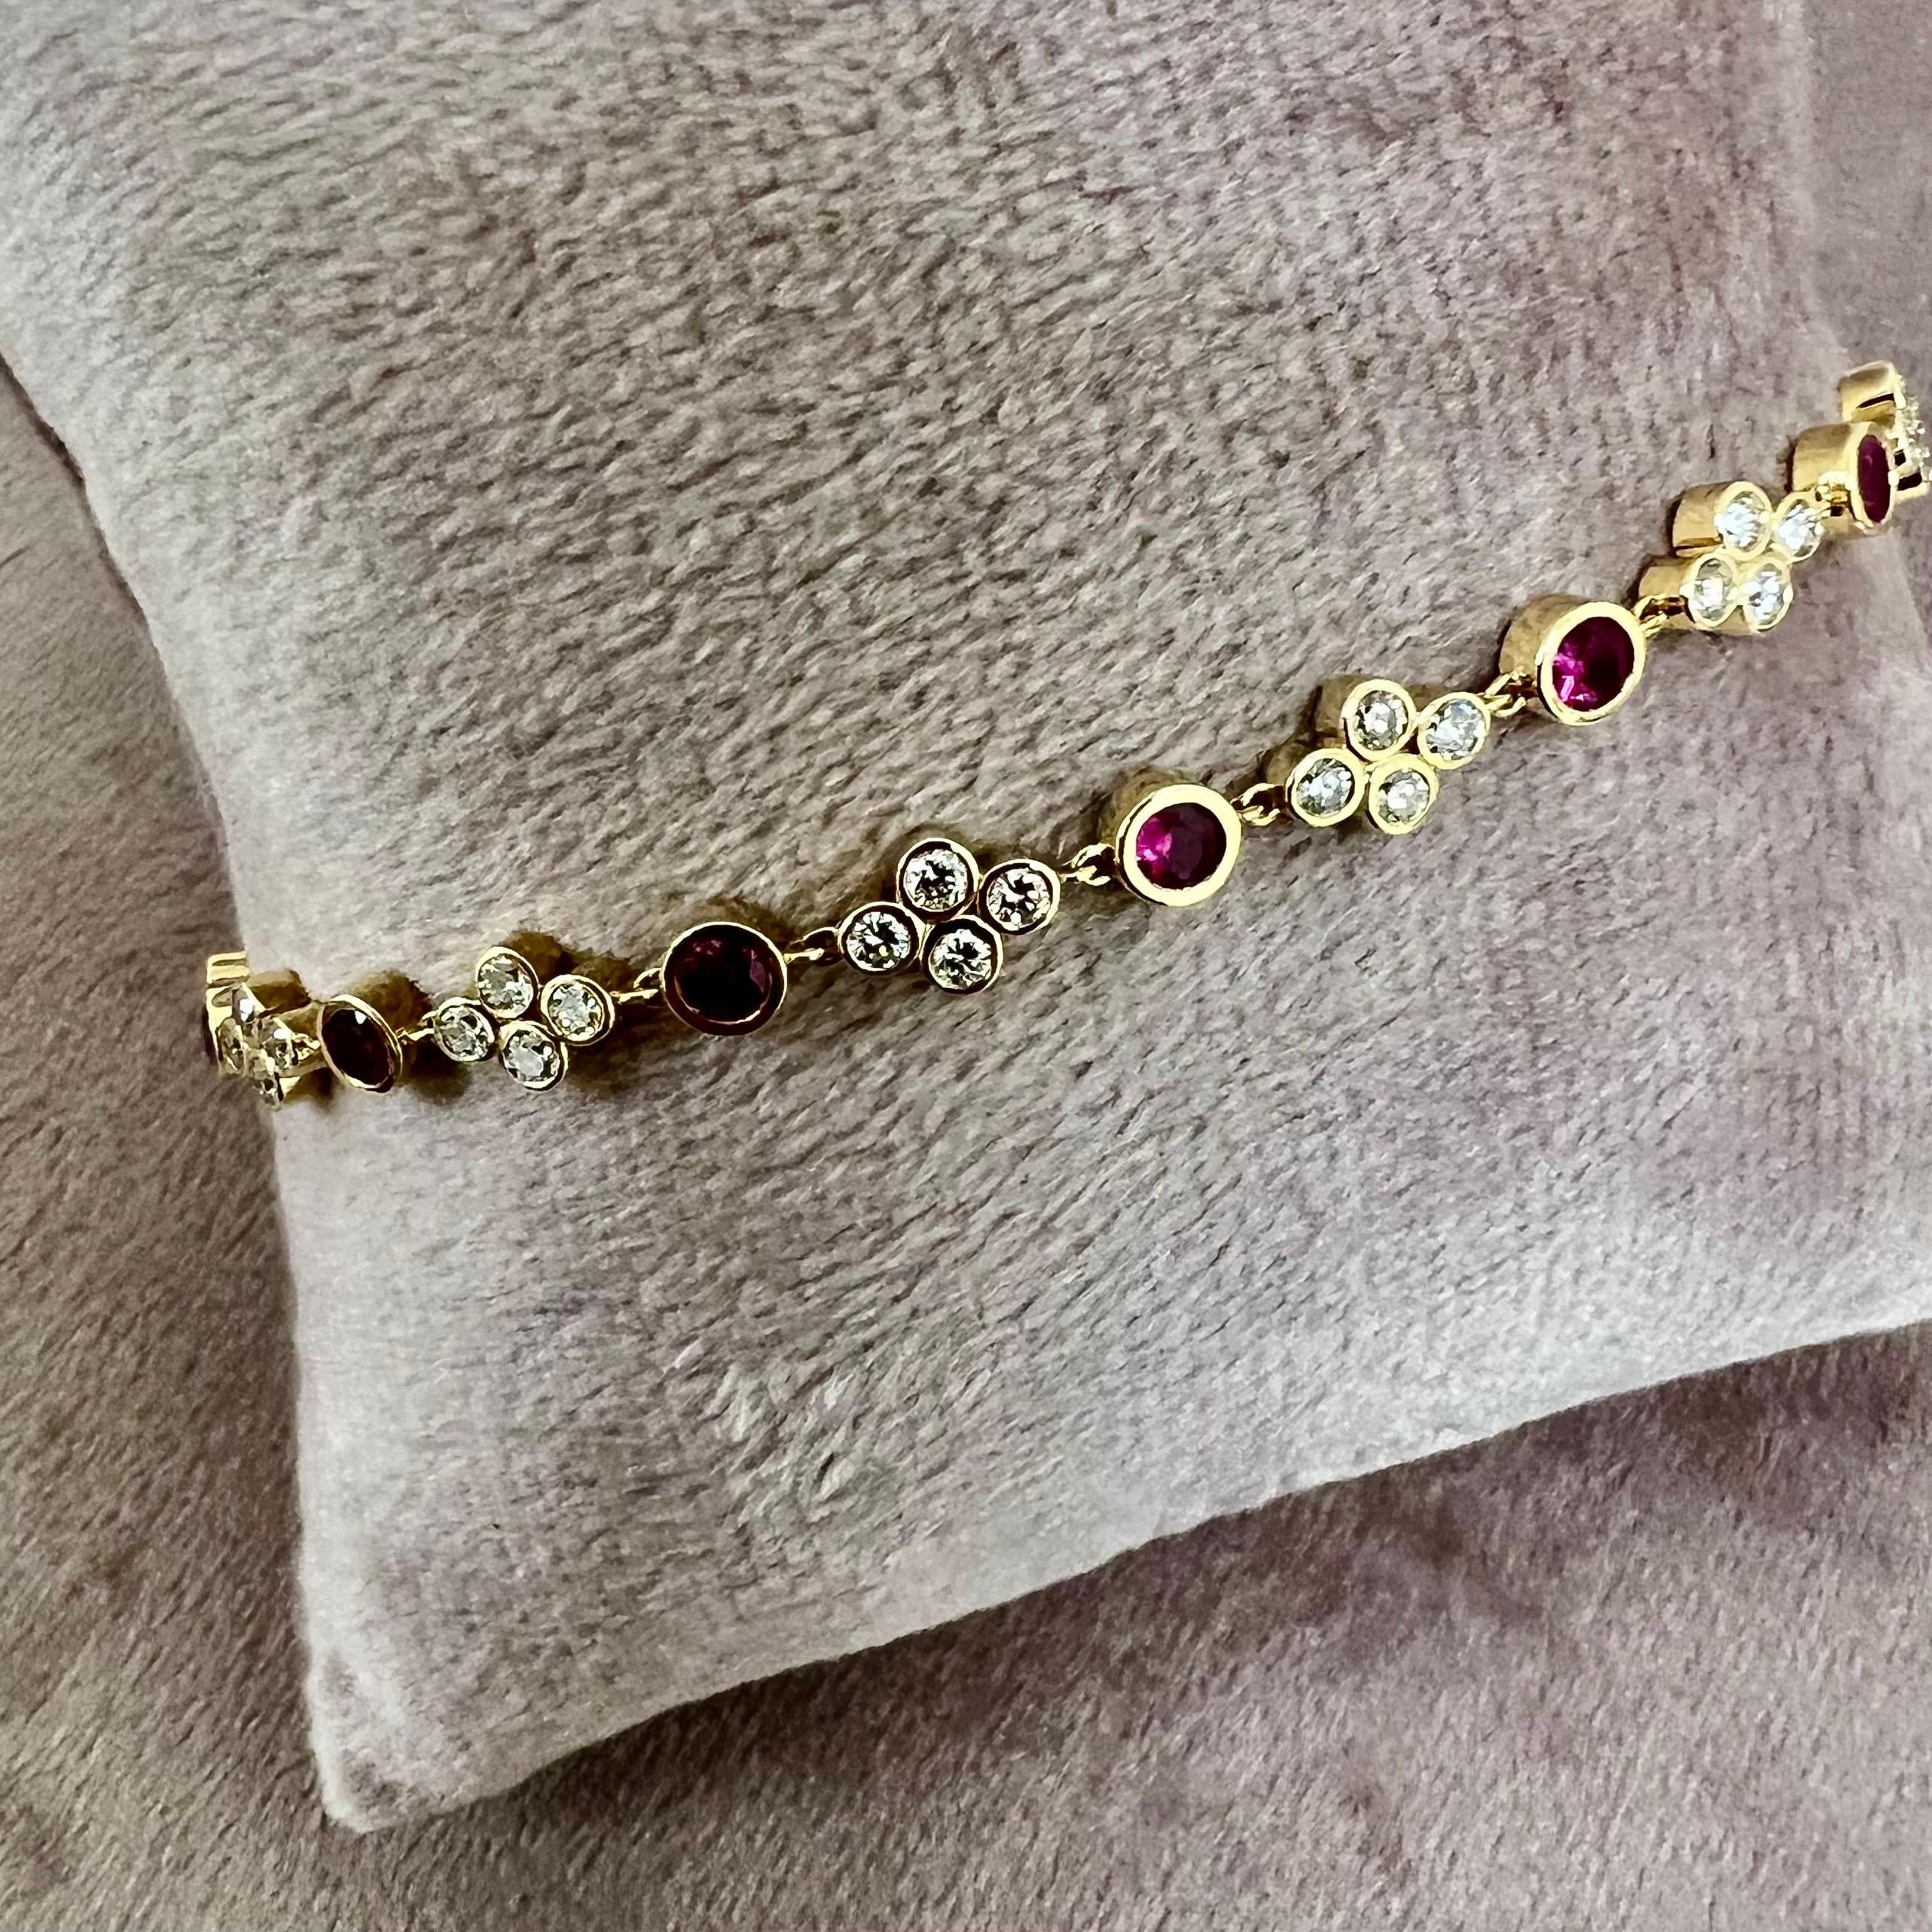 Created in 18 karat yellow gold
Rubies 1.60 carats approx.
Diamonds 1.50 carats approx.
8 inch length with lobster clasp
Bracelet can be clasped at any length

Handcrafted from 18 karat yellow gold, this bracelet features rubies estimated at 1.60